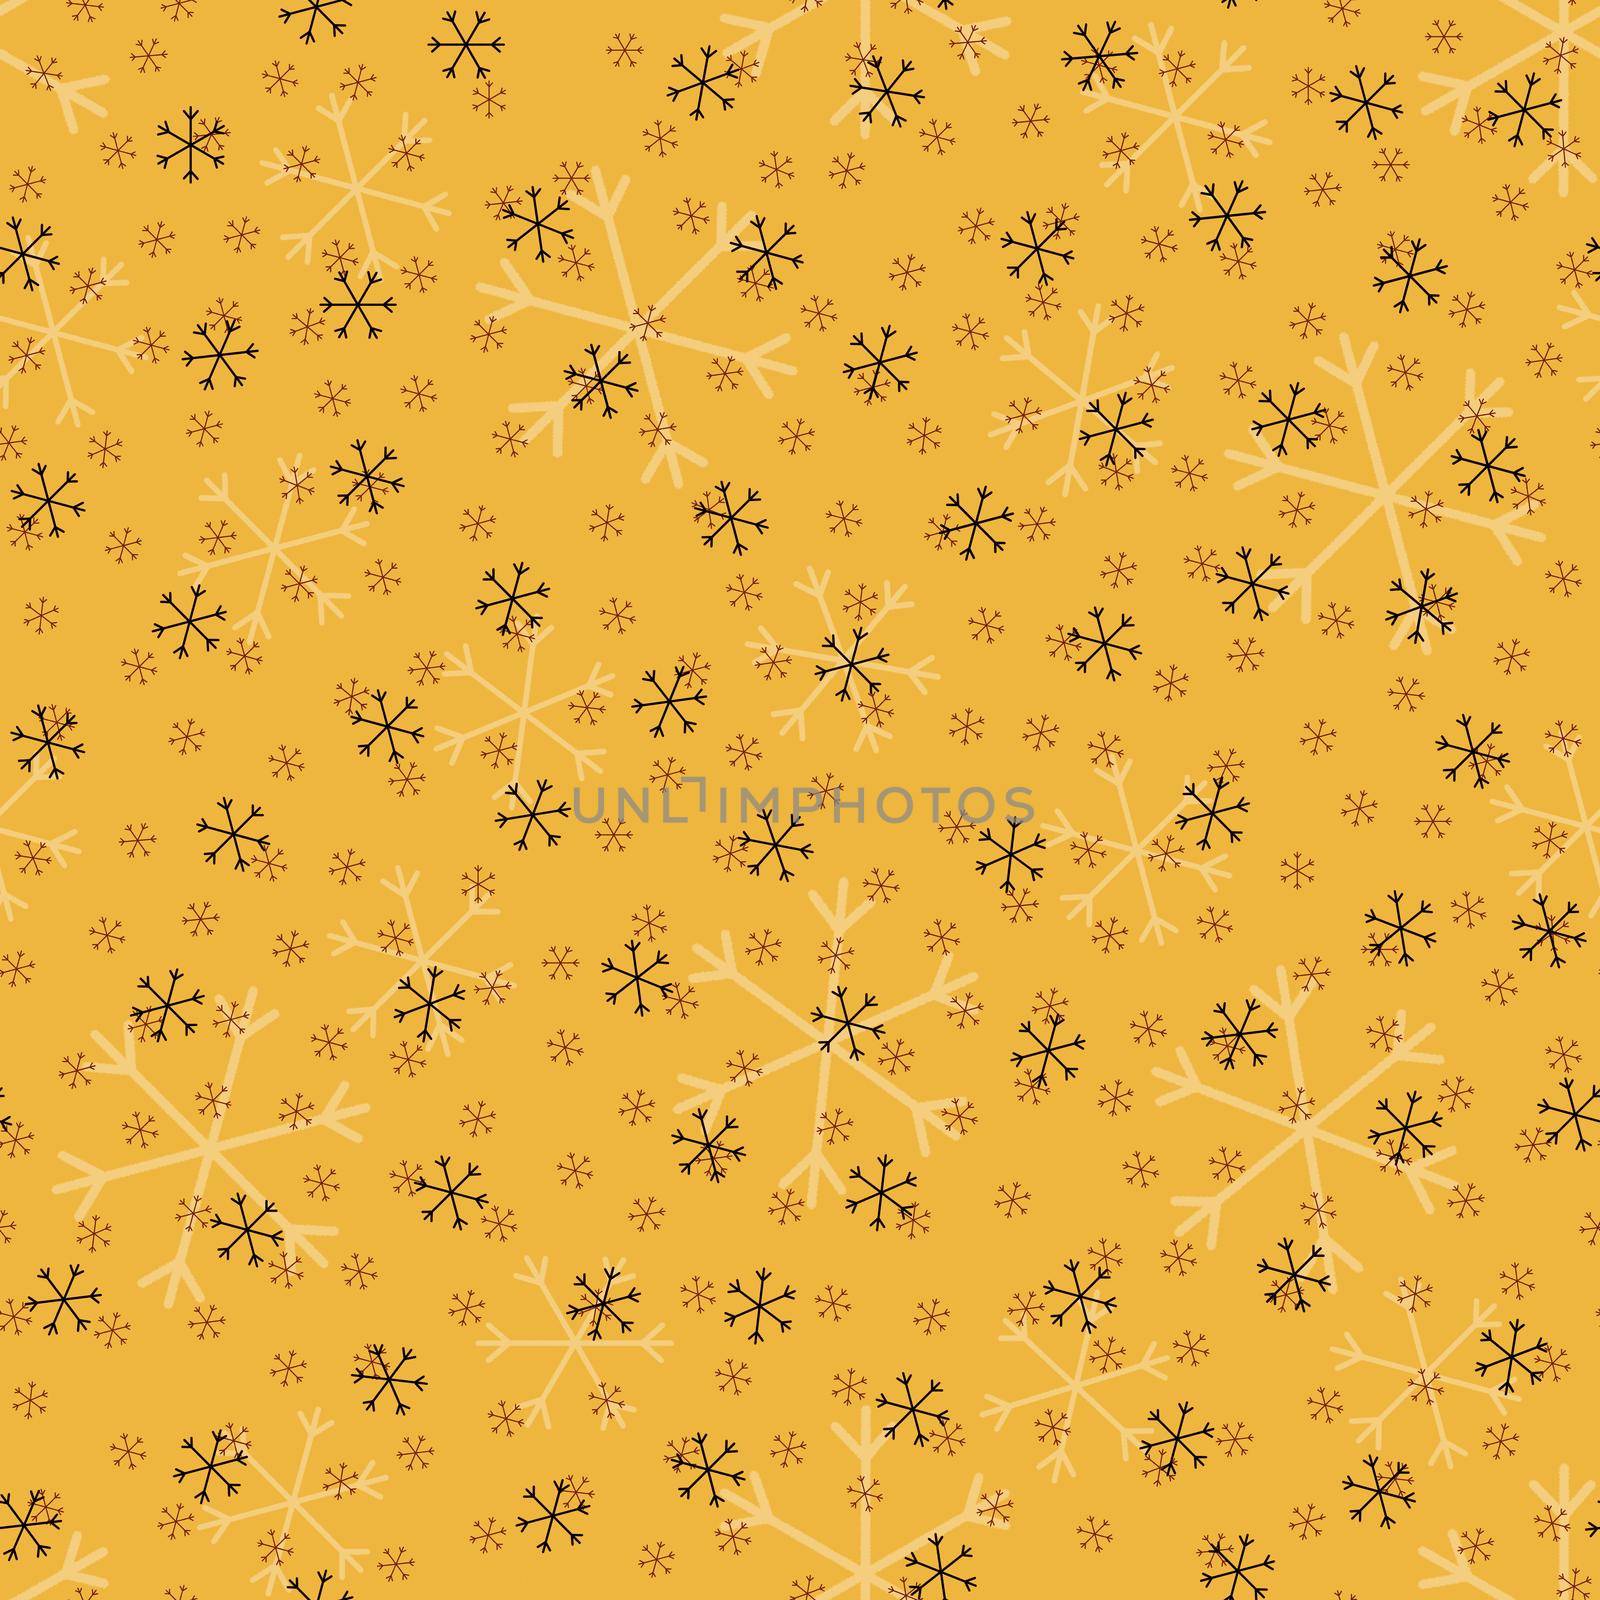 Seamless Christmas pattern doodle with hand random drawn snowflakes.Wrapping paper for presents, funny textile fabric print, design, decor, food wrap, backgrounds. new year.Raster copy.Mustard black